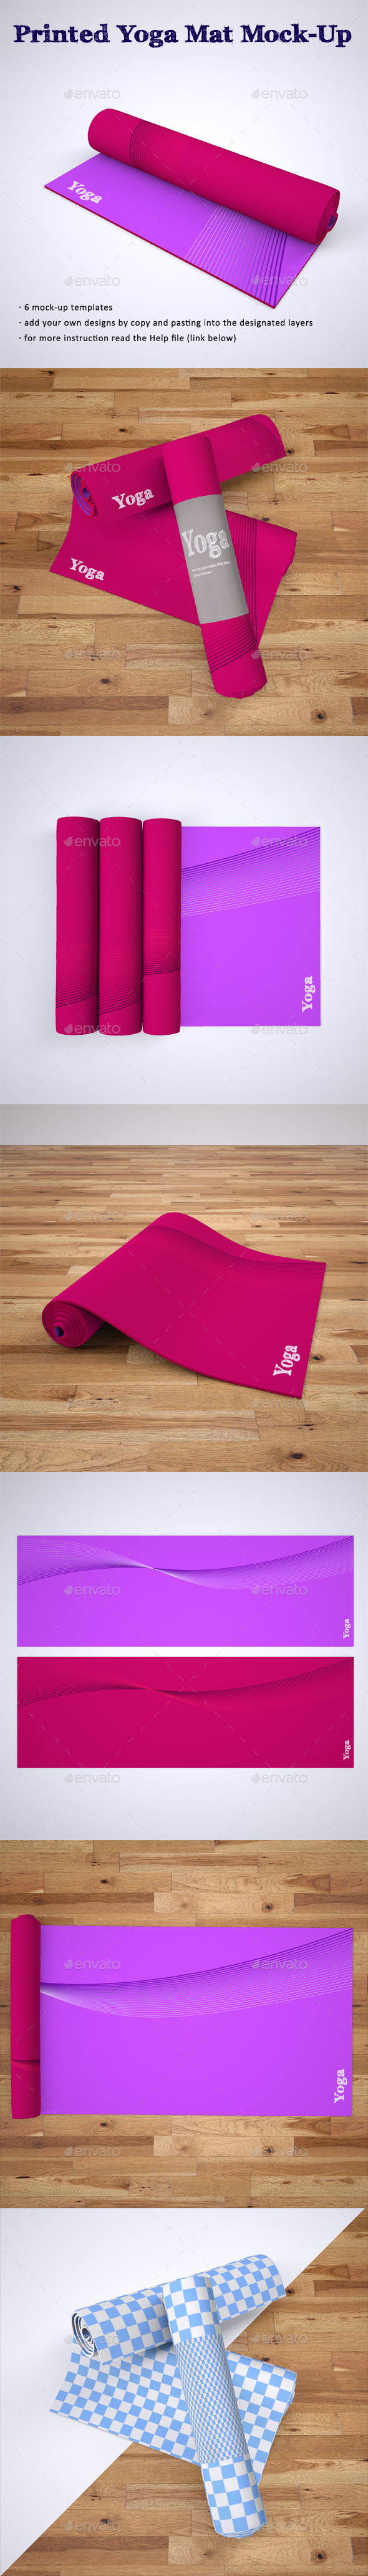 Download Printed Yoga Mat Exercise Rug Mock Up By Sanchi477 Graphicriver